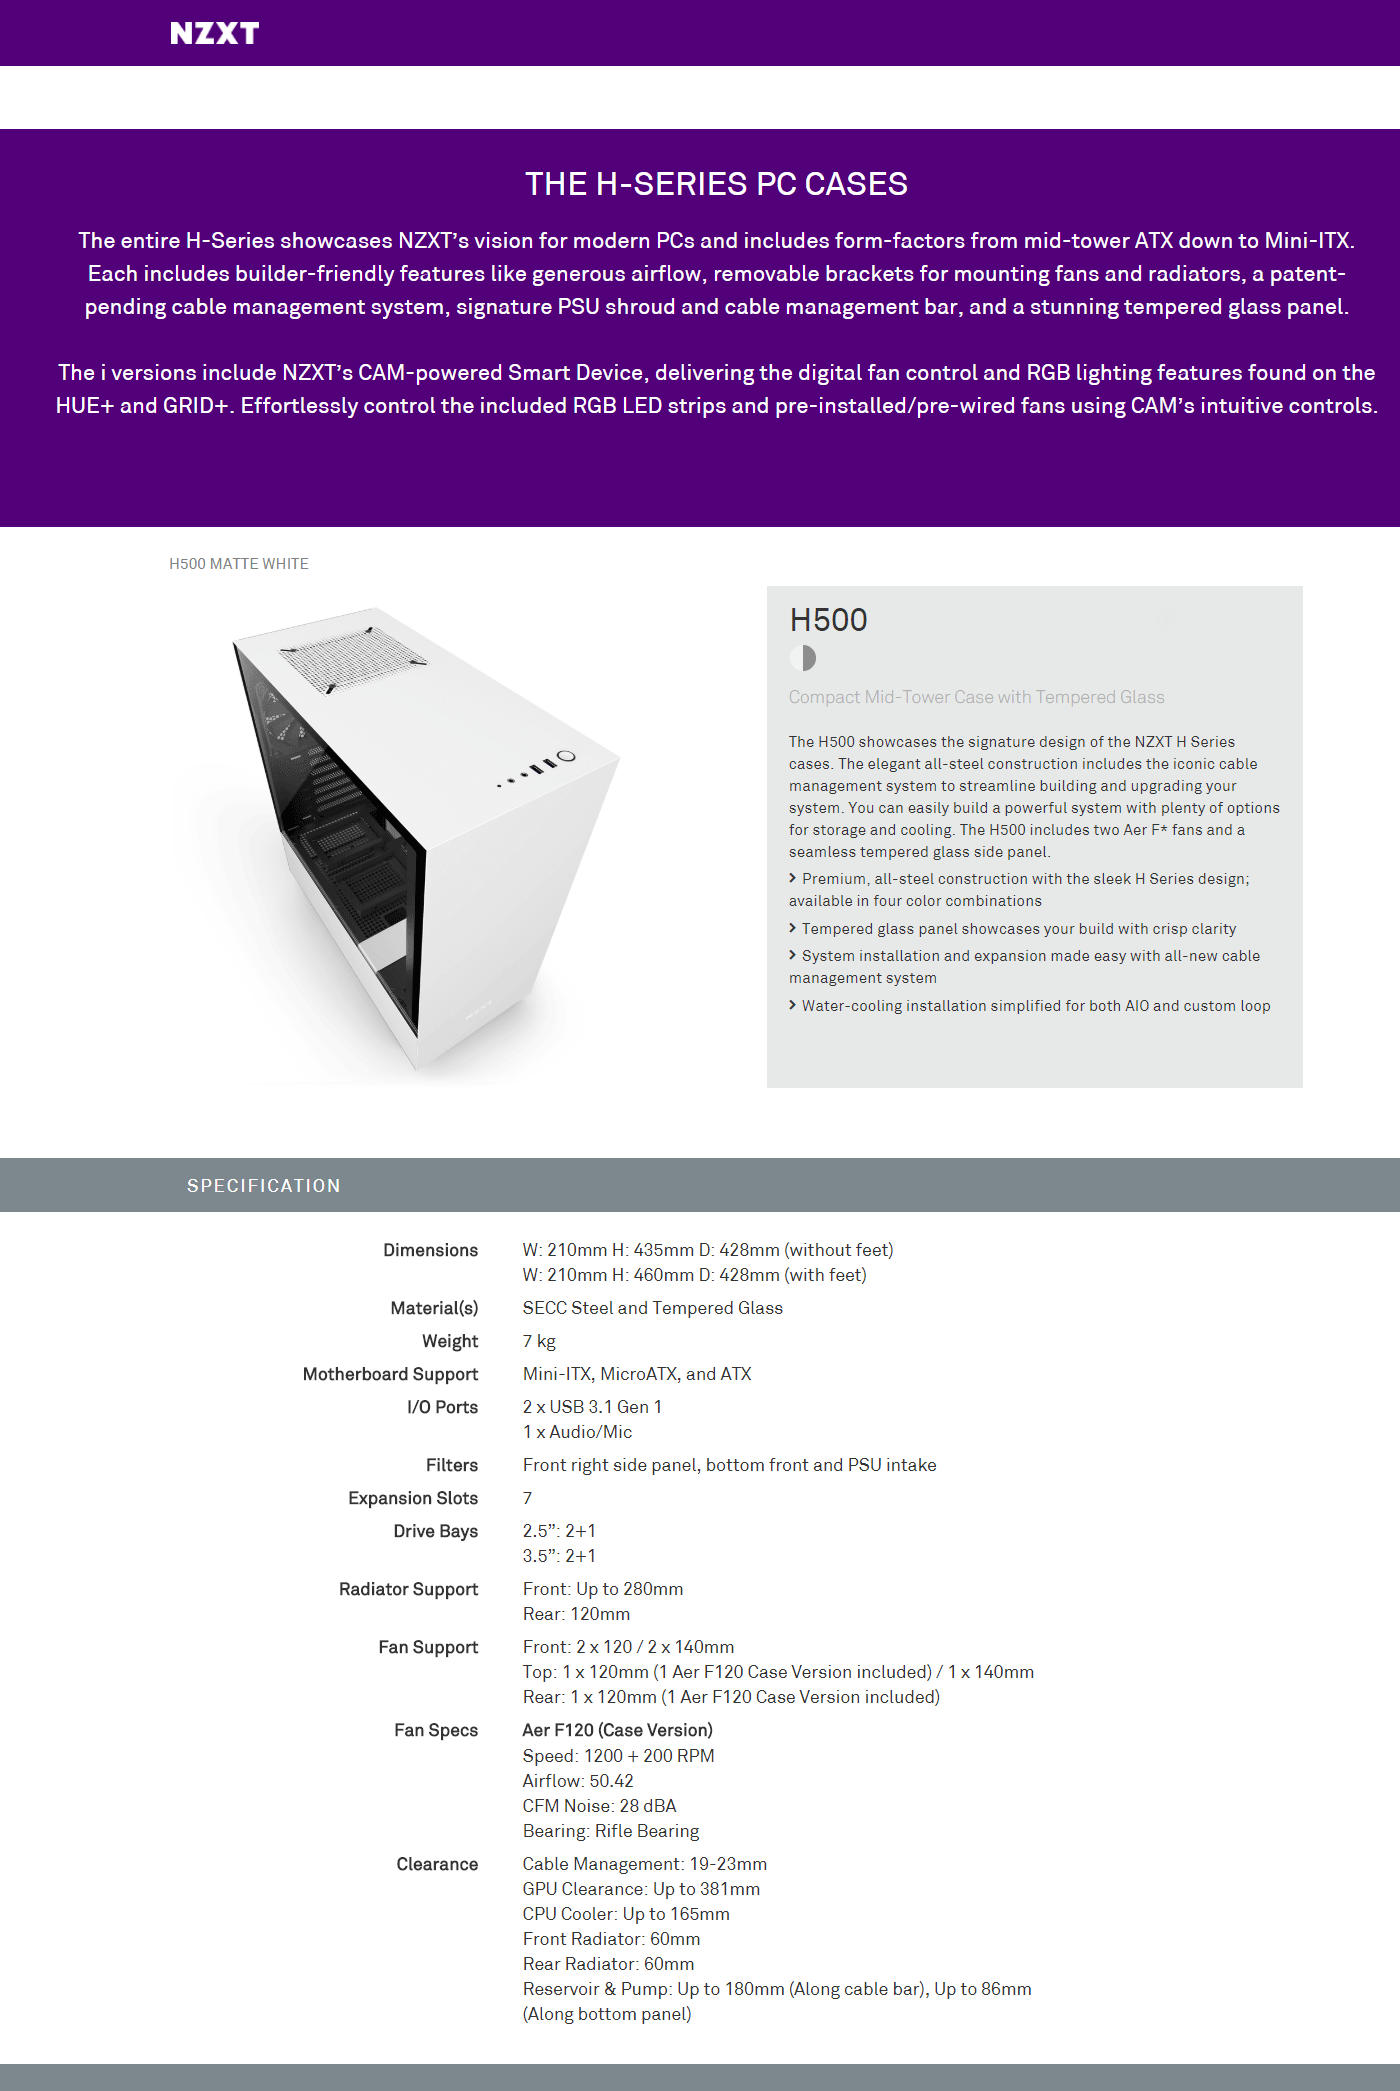  Buy Online Nzxt H500 Compact Mid-Tower Case with Tempered Glass - Matte White (CA-H500B-W1)